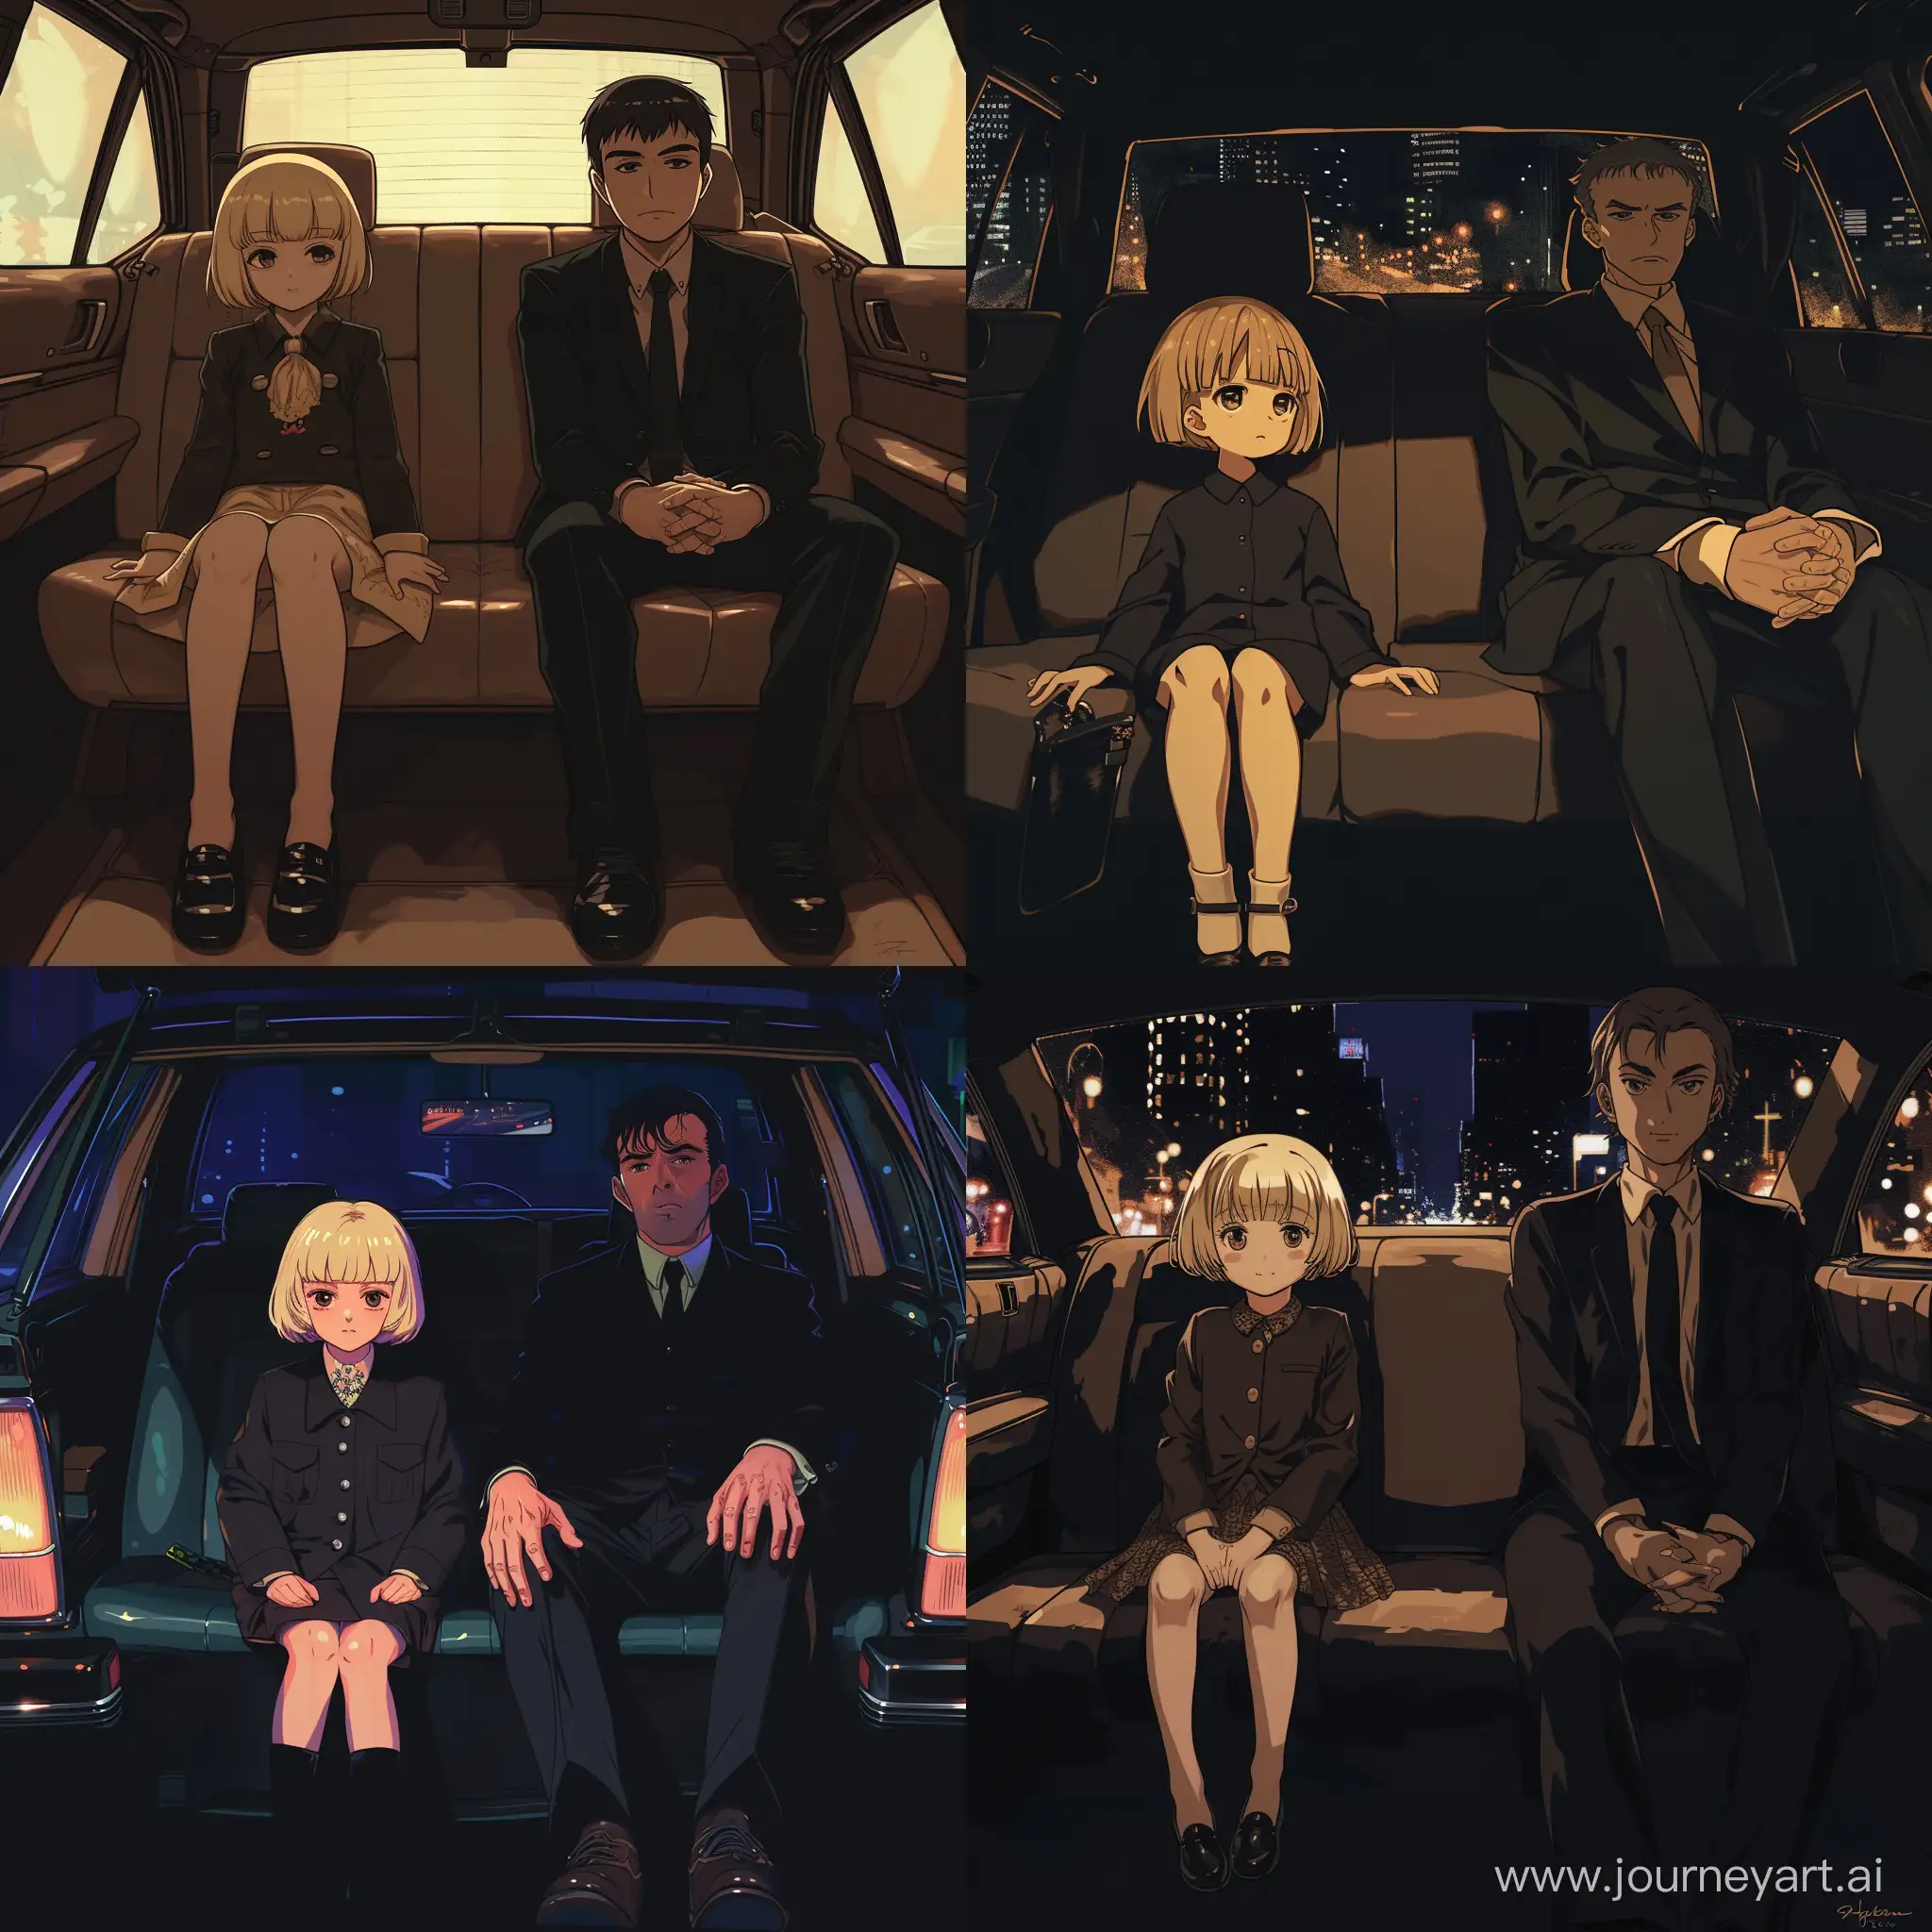 Charming-90s-Anime-Duo-Adorable-Girl-and-Dapper-Man-in-Car-Journey